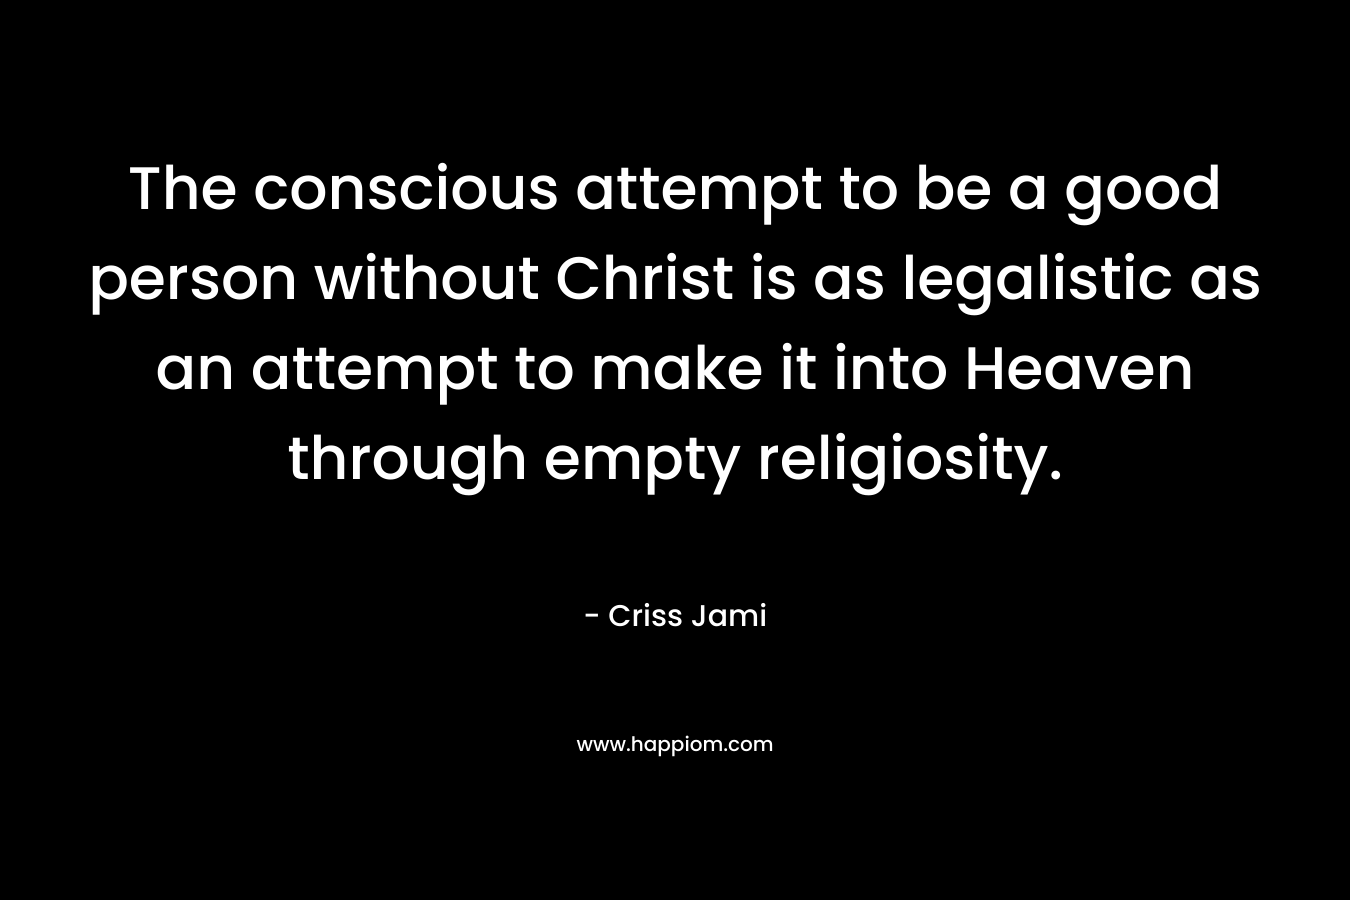 The conscious attempt to be a good person without Christ is as legalistic as an attempt to make it into Heaven through empty religiosity.